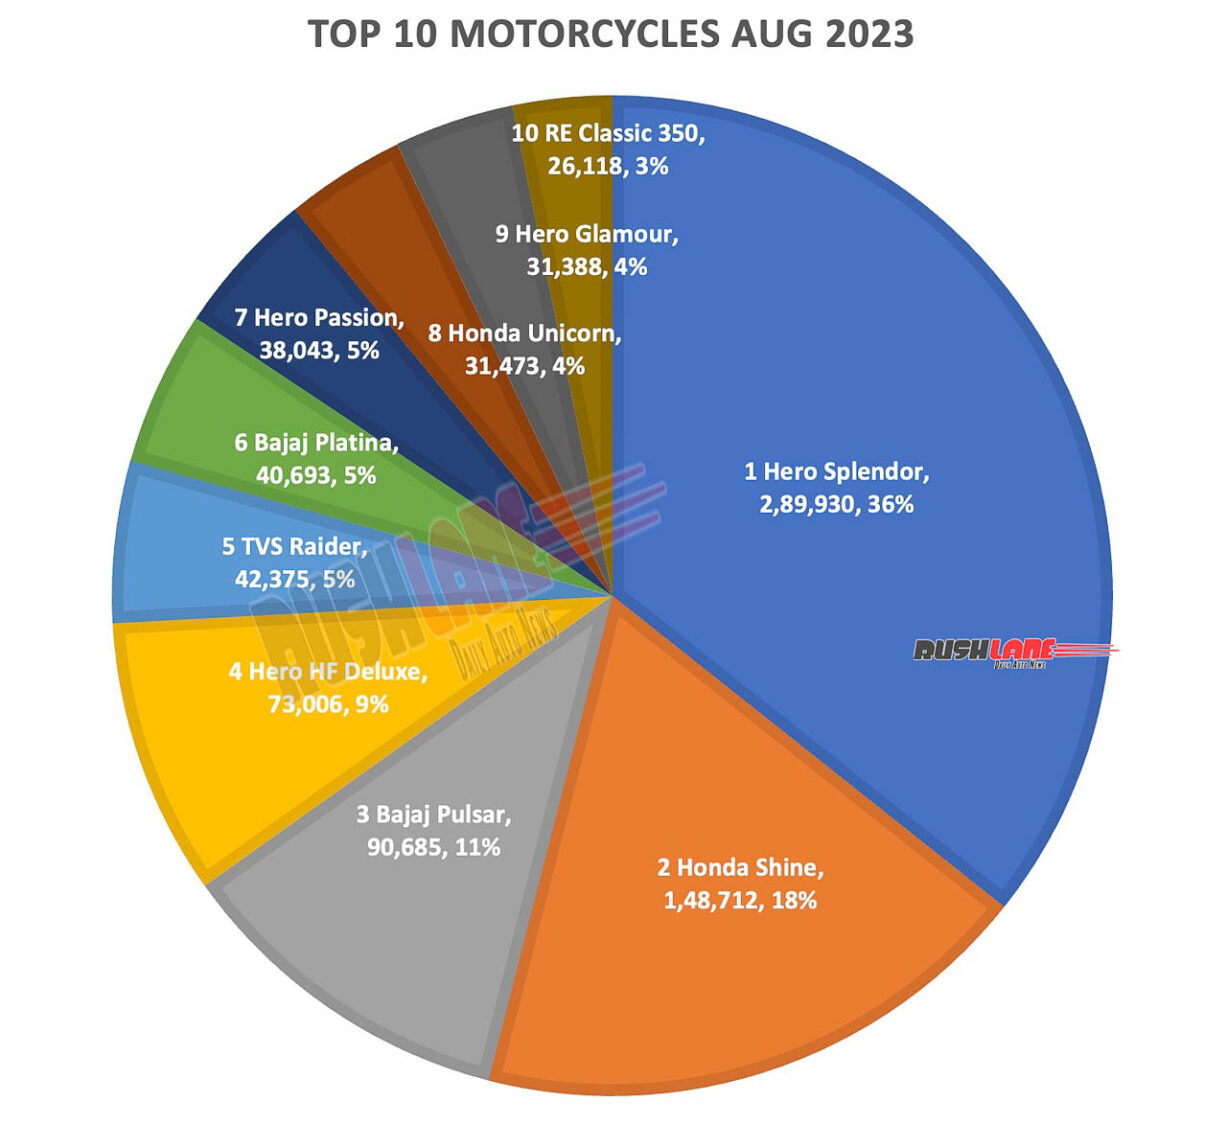 Top 10 Motorcycles Aug 2023